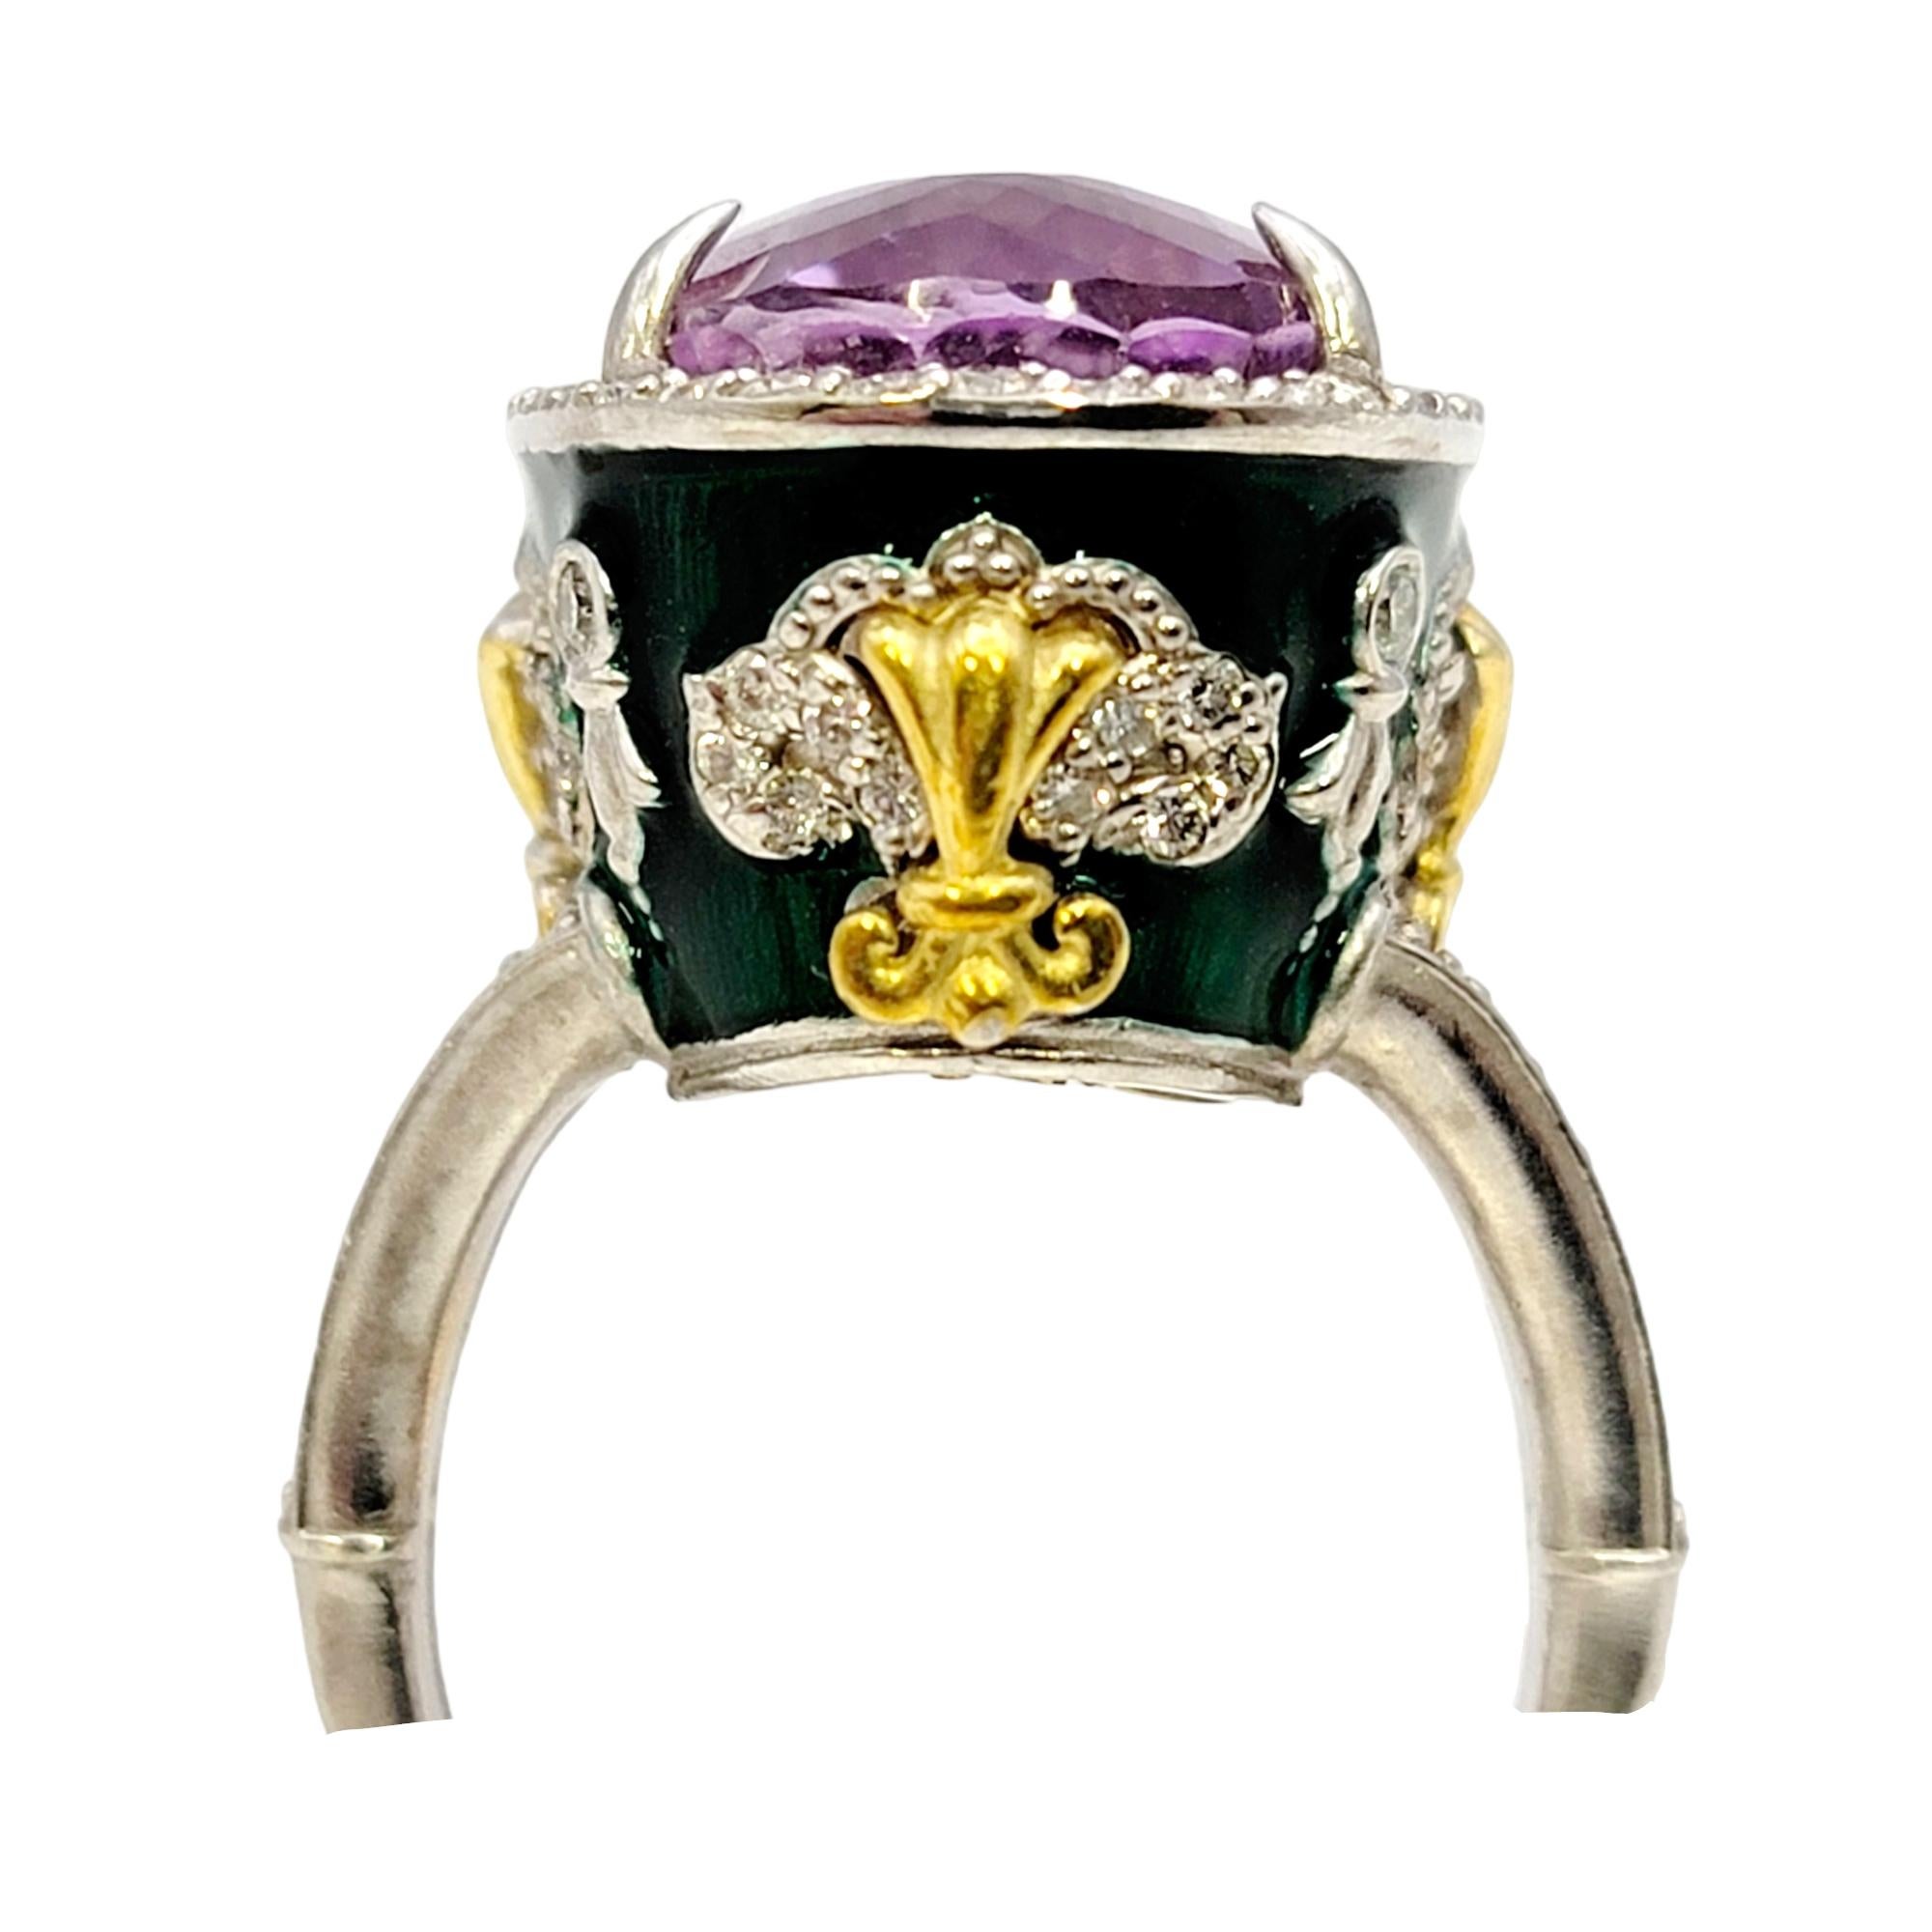 Stambolian Oval Kunzite with Diamond Halo and Green Enamel High Profile Ring 7